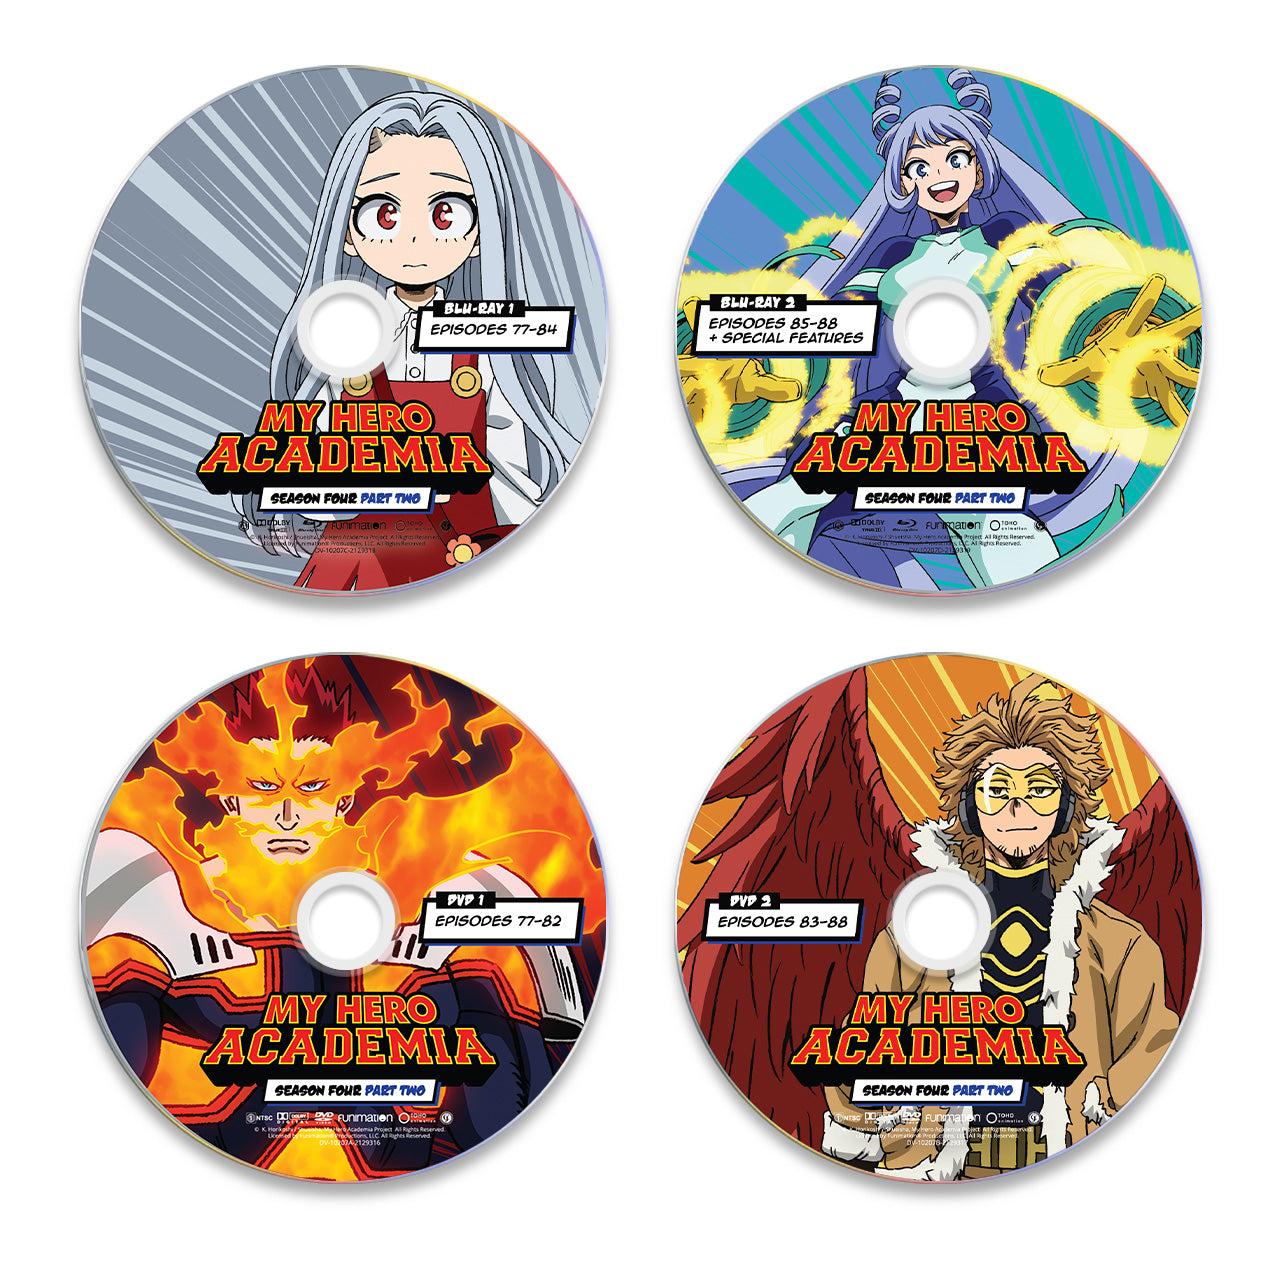 My Hero Academia - Season 4 Part 2 - Limited Edition - Blu-ray + DVD image count 6